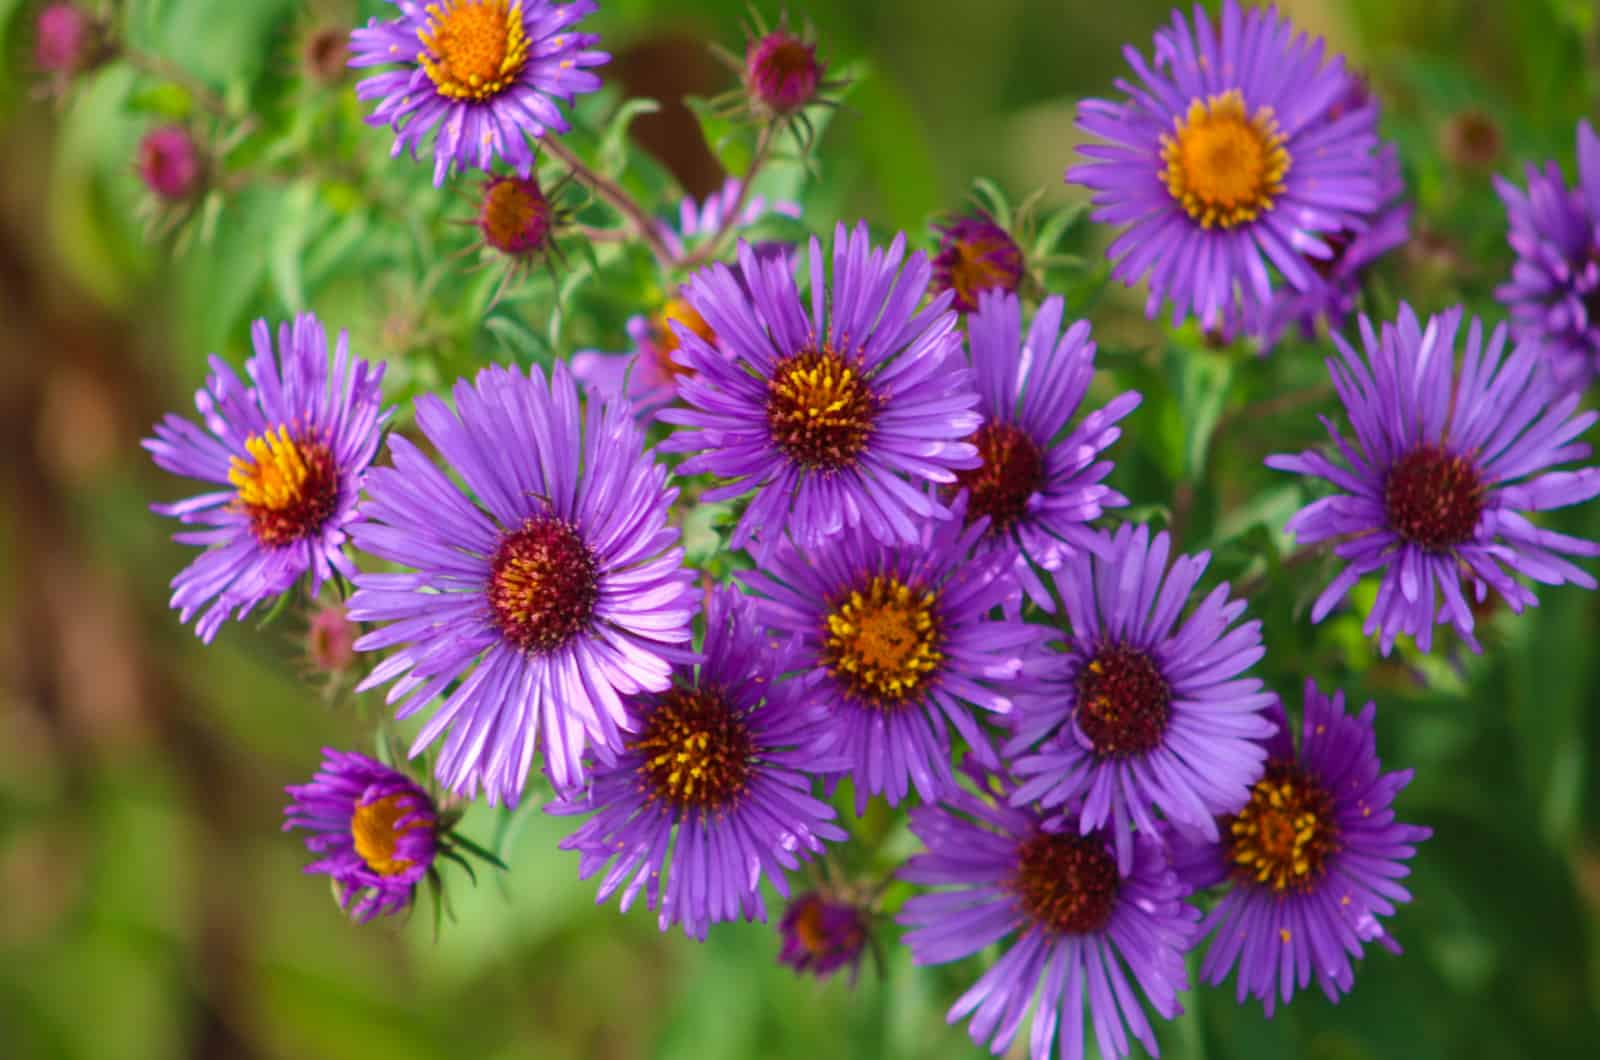 The New England Aster